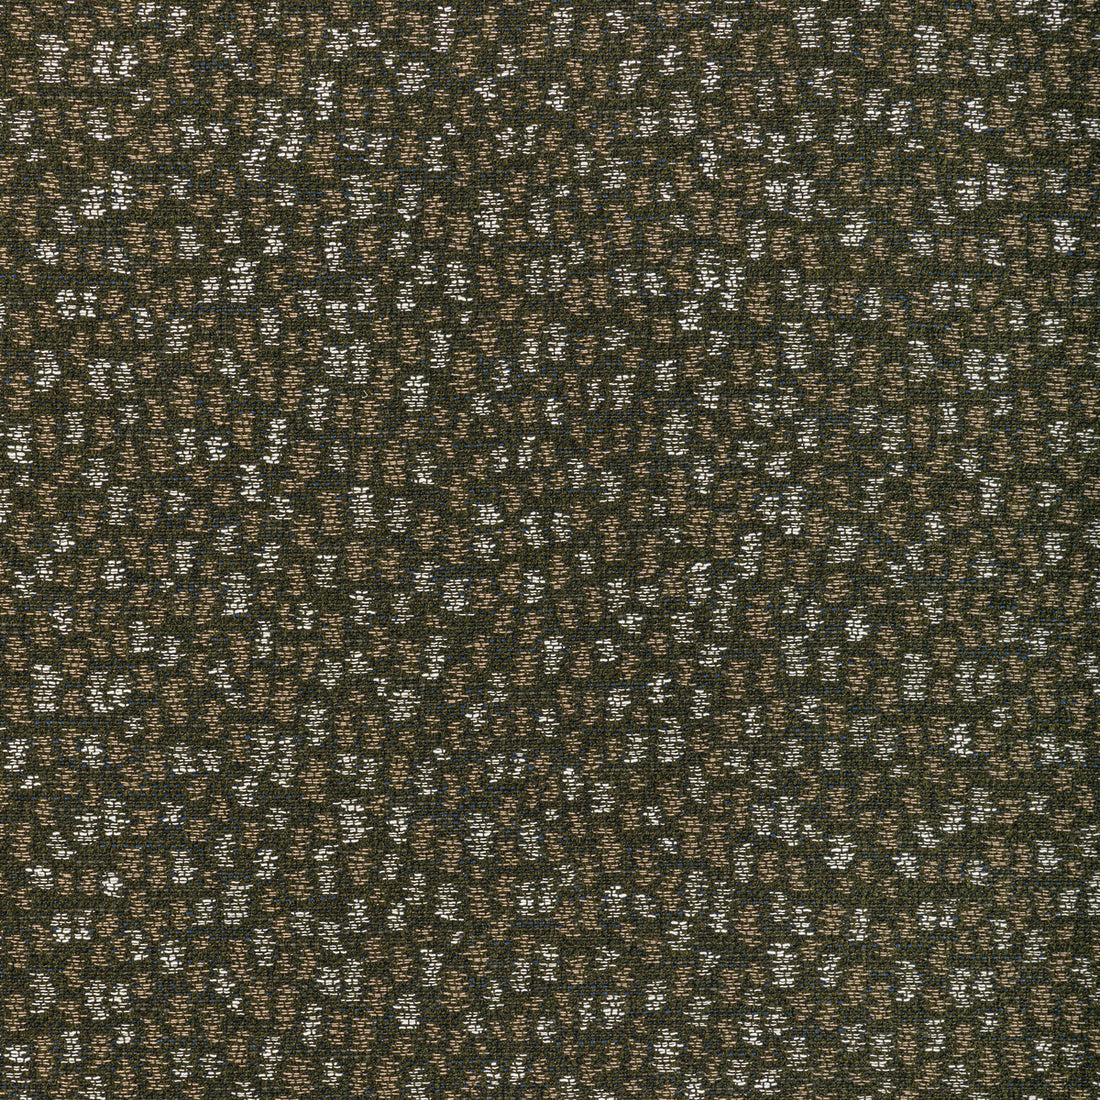 Combe fabric in evergreen color - pattern GWF-3787.30.0 - by Lee Jofa Modern in the Kelly Wearstler Oculum Indoor/Outdoor collection